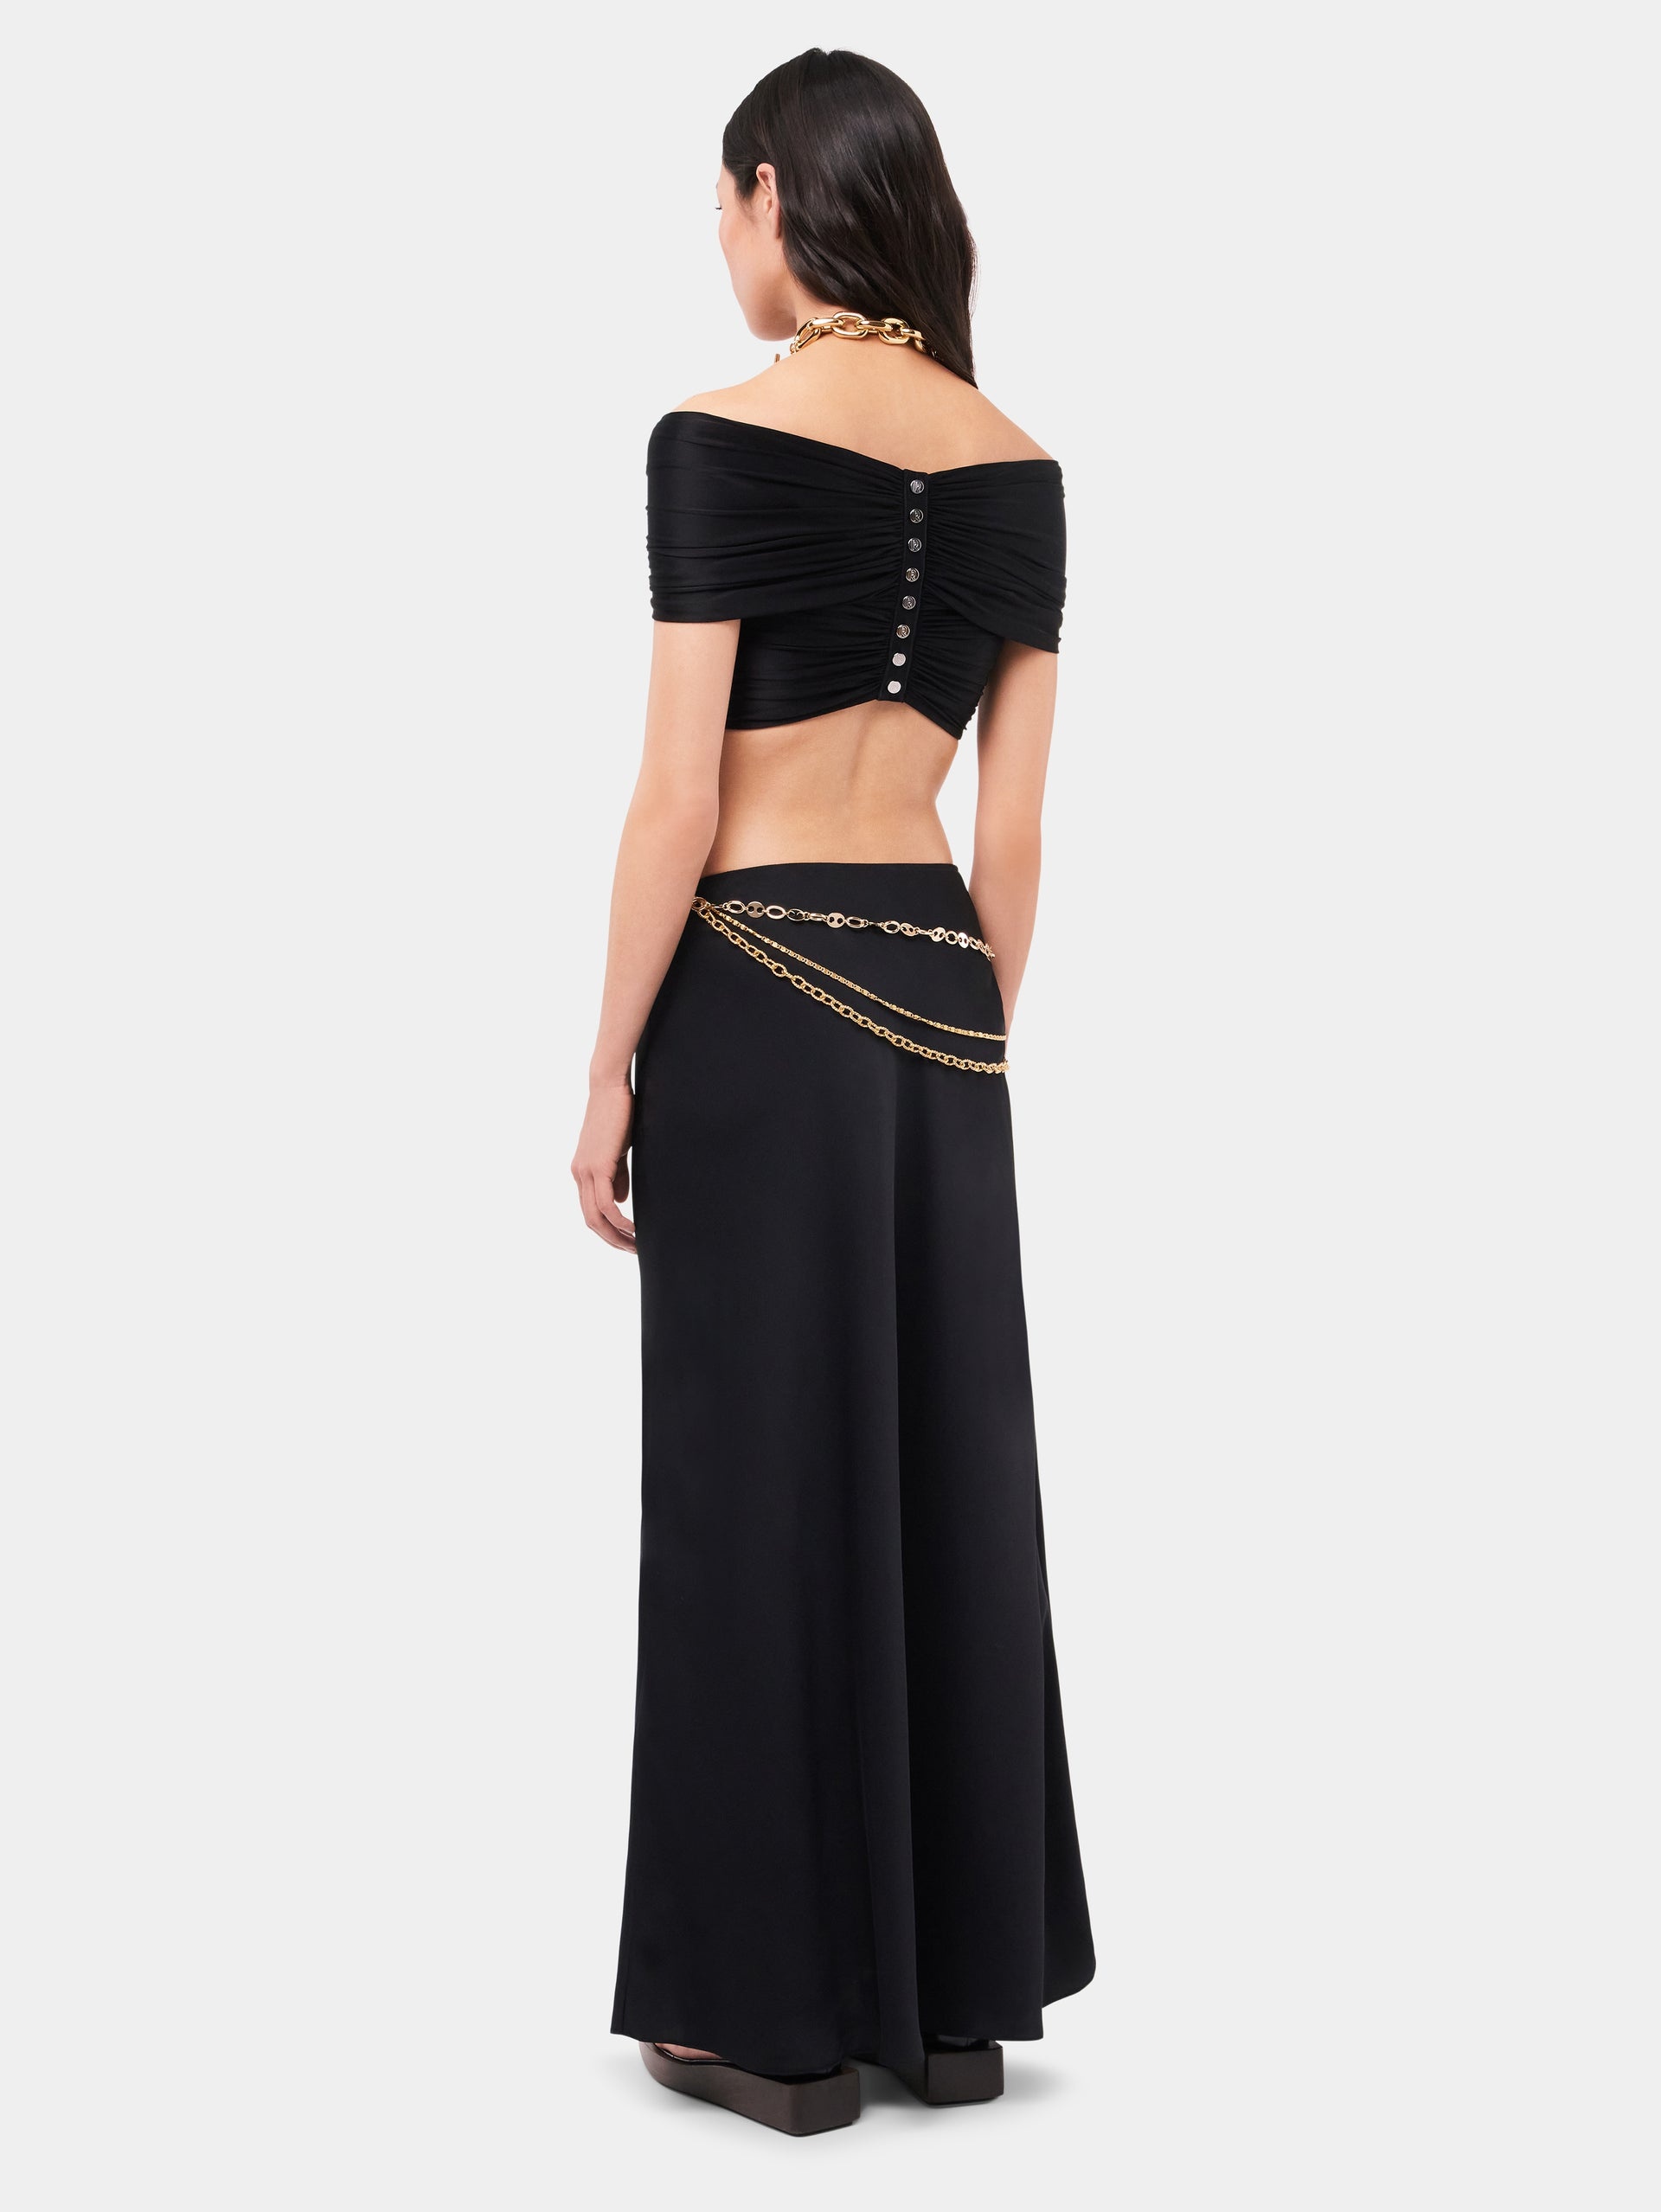 LONG BLACK SKIRT EMBELLISHED WITH "EIGHT" SIGNATURE CHAIN - 5